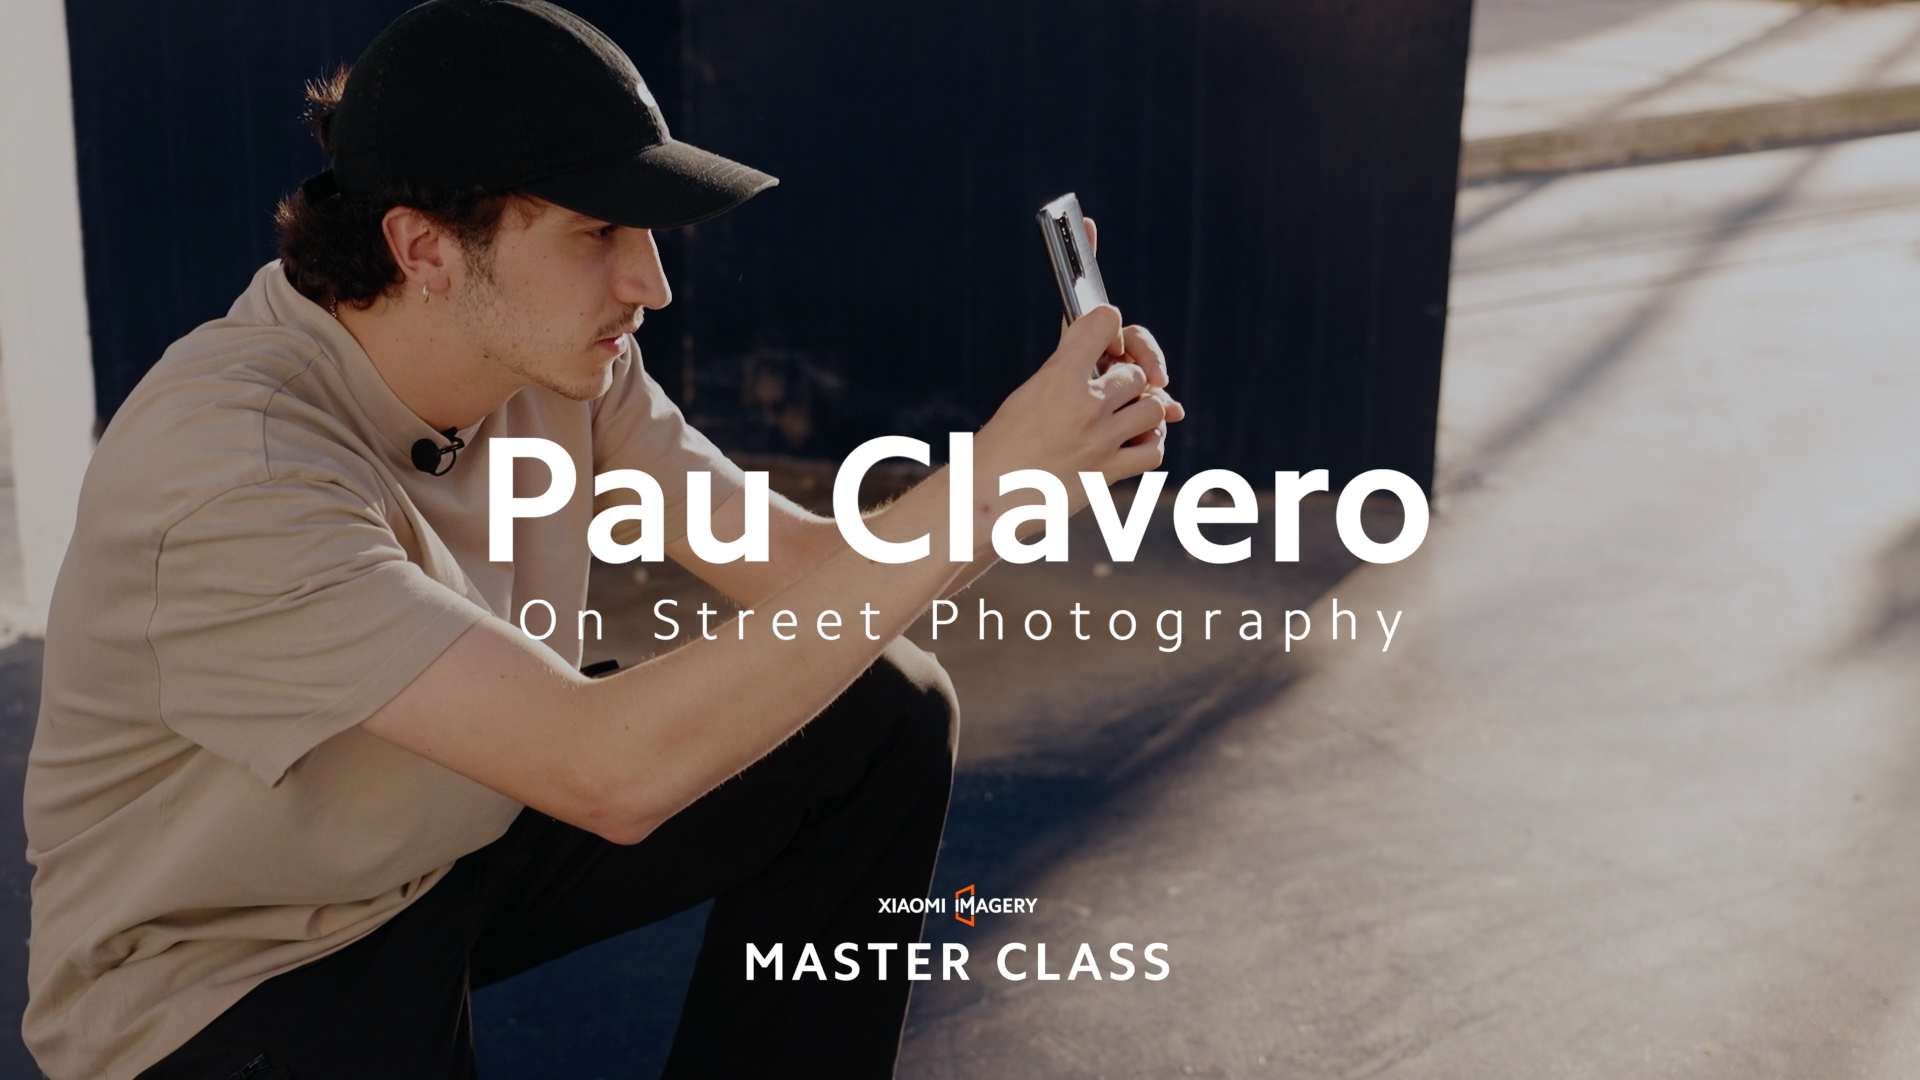 Xiaomi Master Class Supported by Leica - Xiaomi Imagery